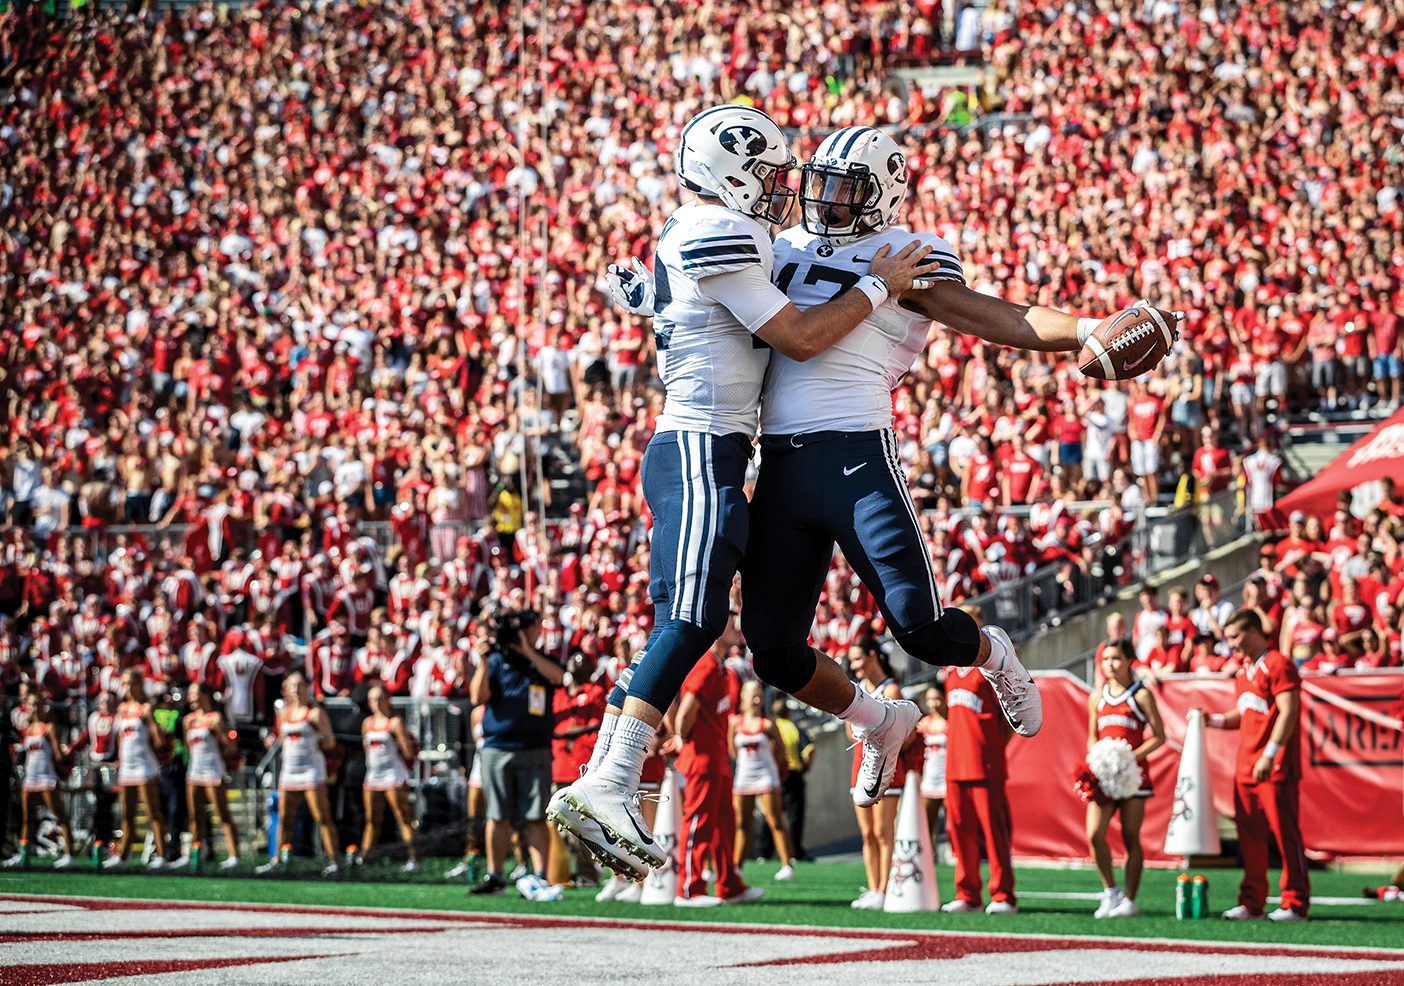 BYU football players Tanner Mangum and Moroni Laulu-Pututau celebrate following a touchdown at at football game at Wisconsin in September 2018.